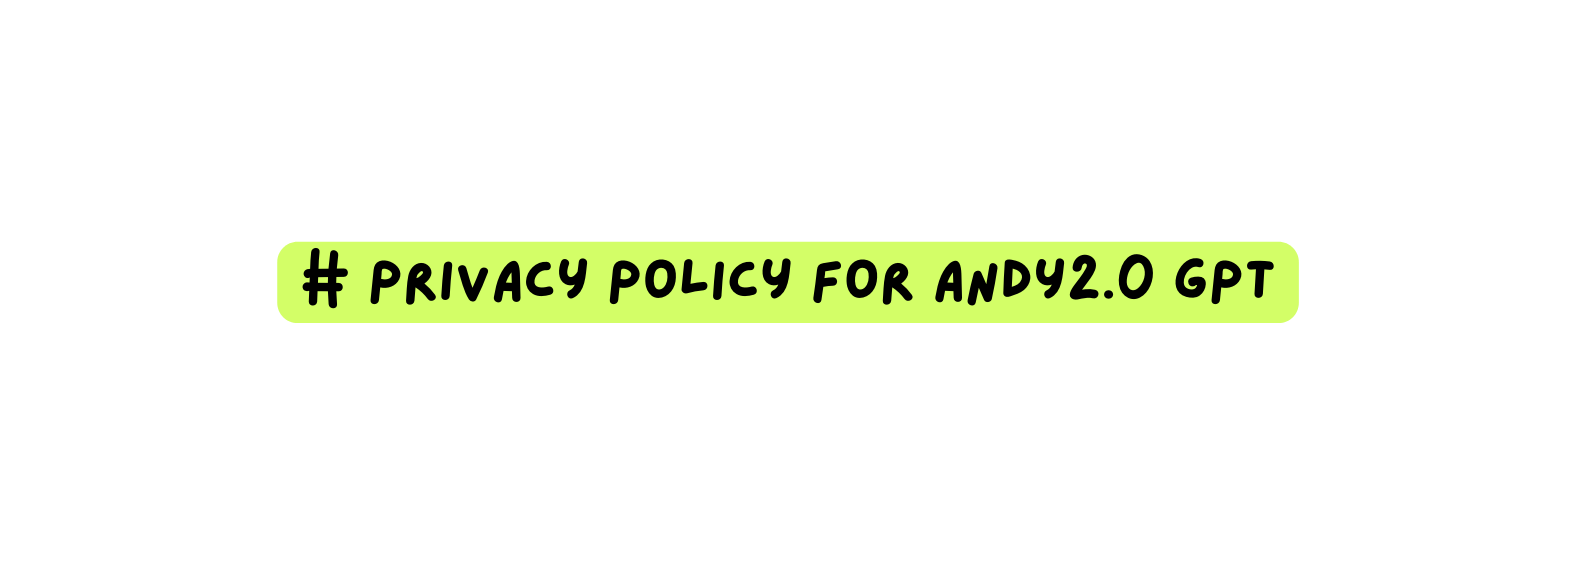 Privacy Policy for Andy2 0 GPT